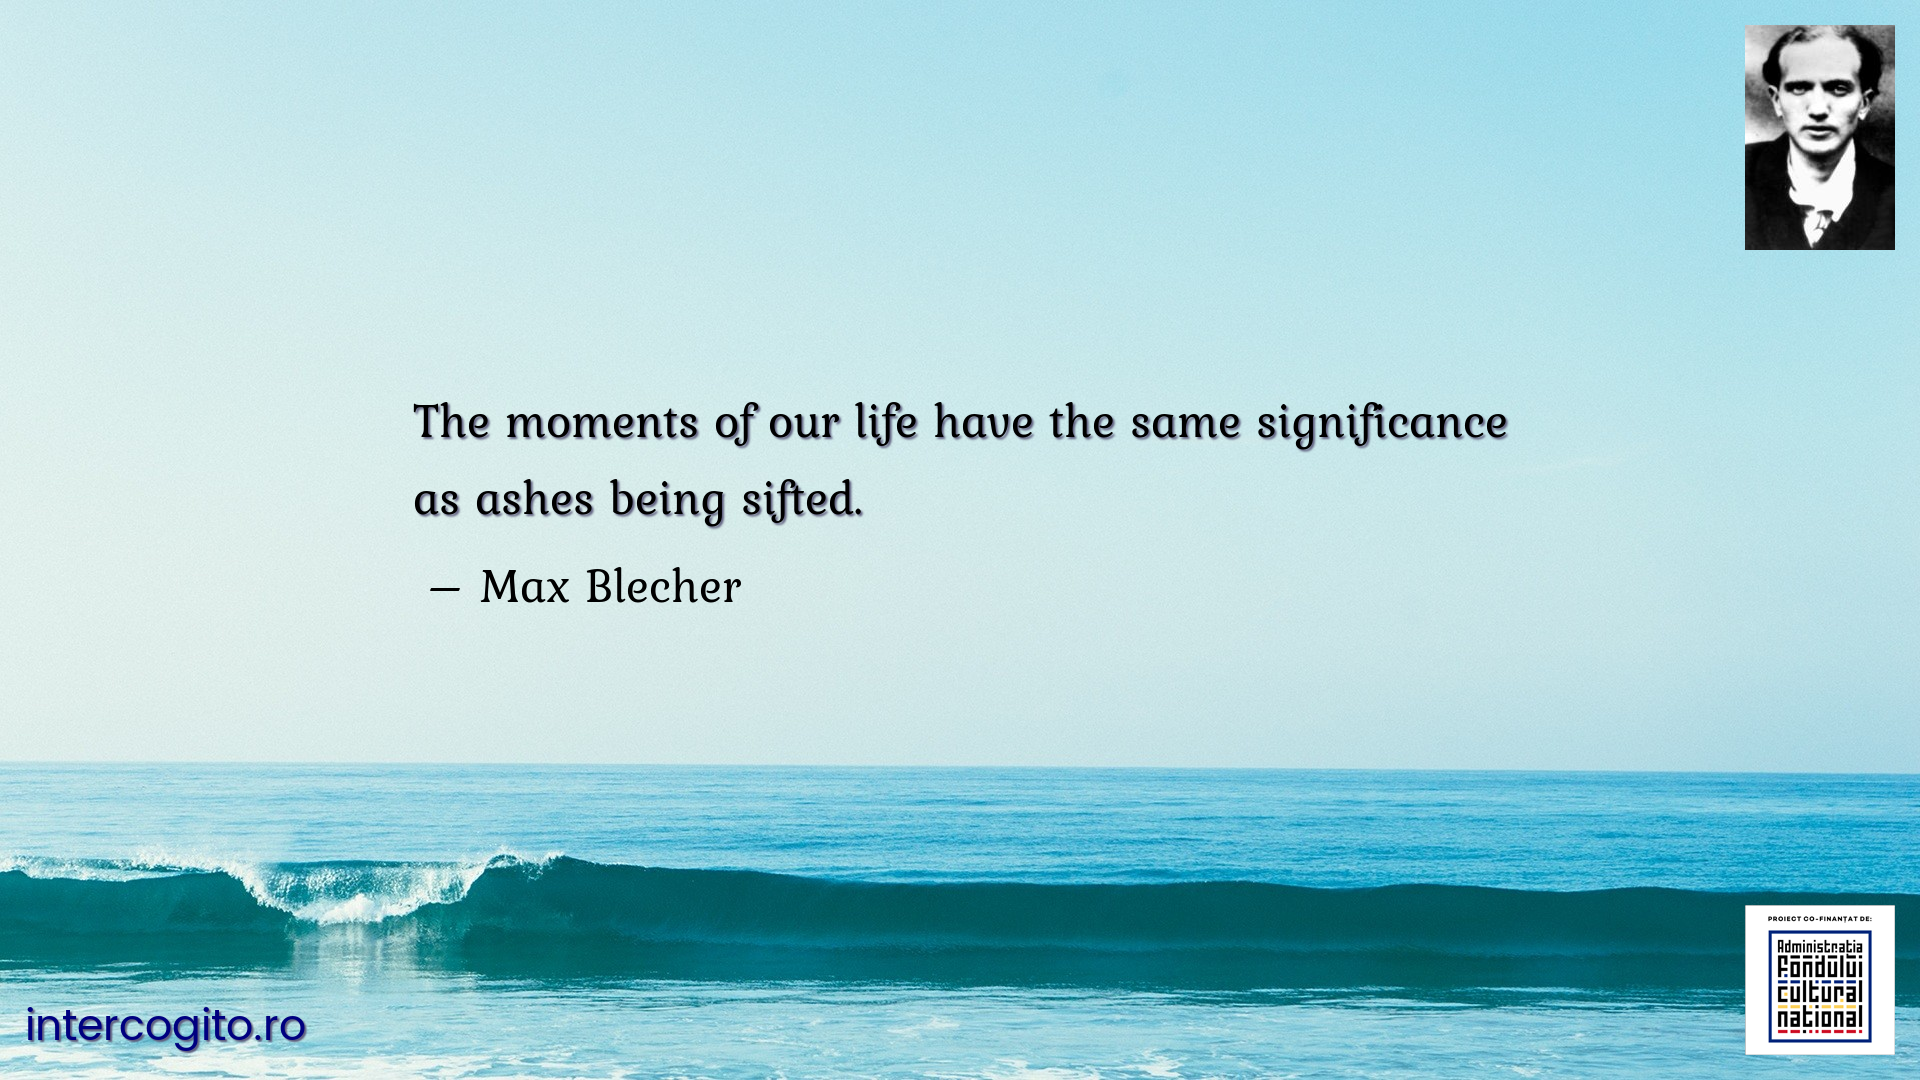 The moments of our life have the same significance as ashes being sifted.